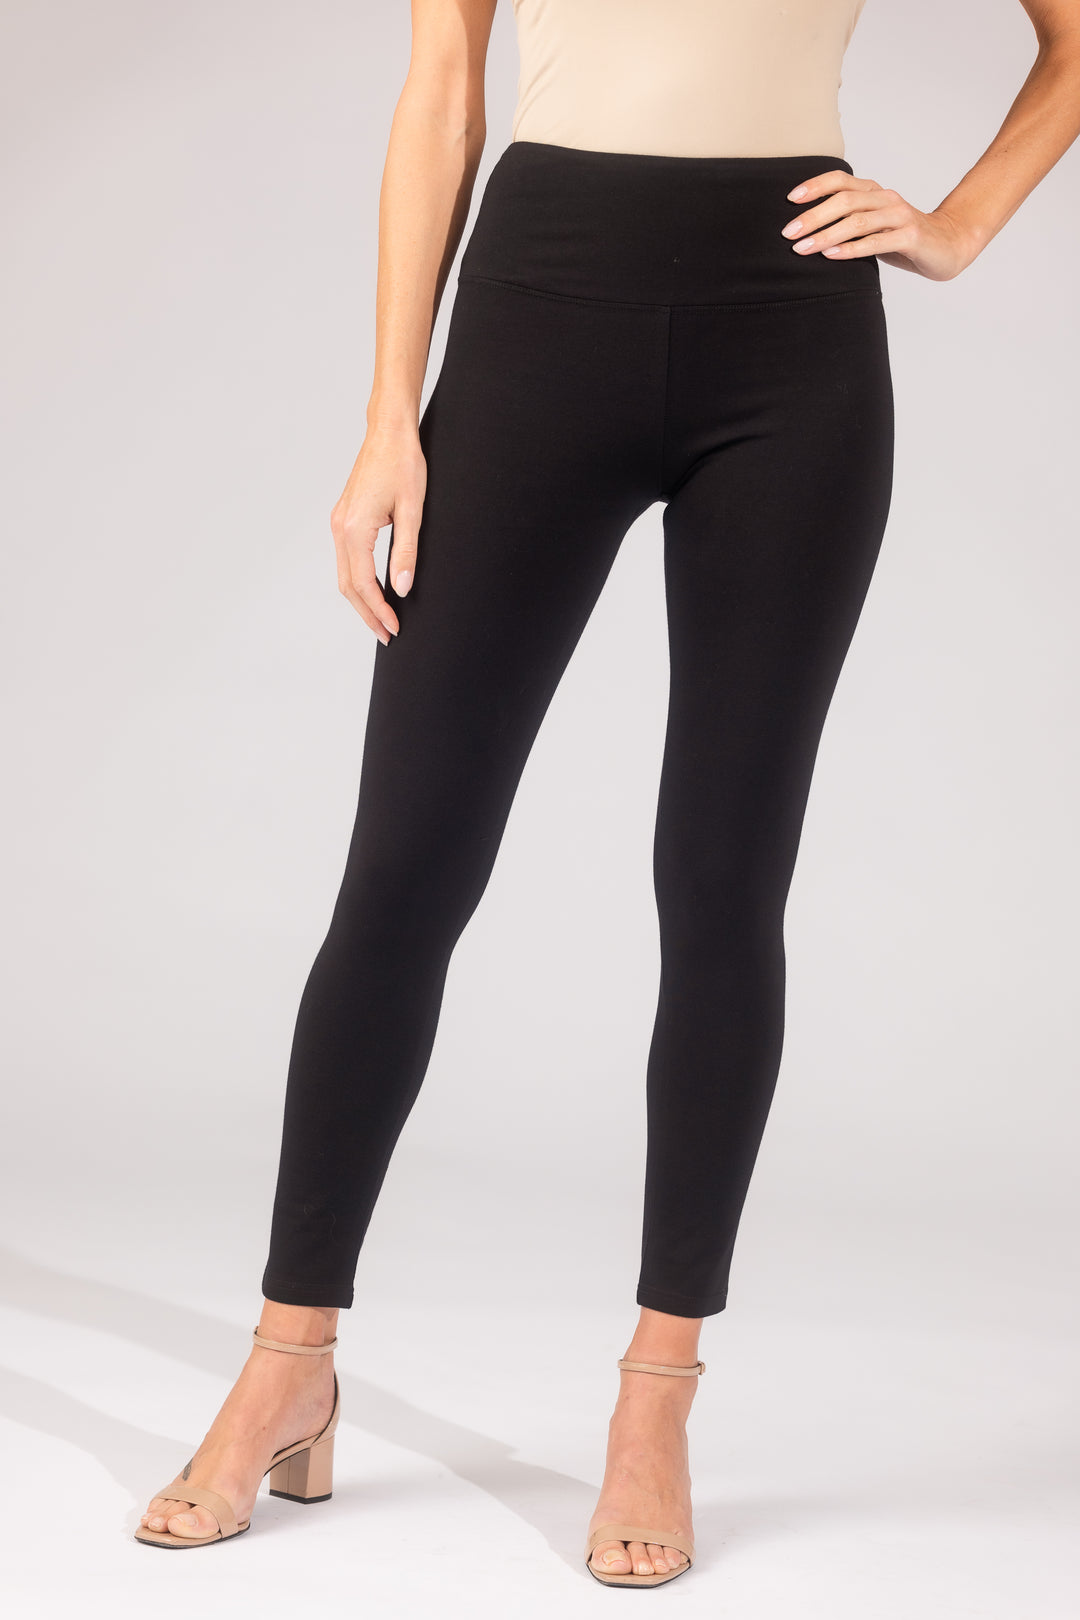 Intro Love the Fit Slimming Leggings Pull-On Clothing – Intro